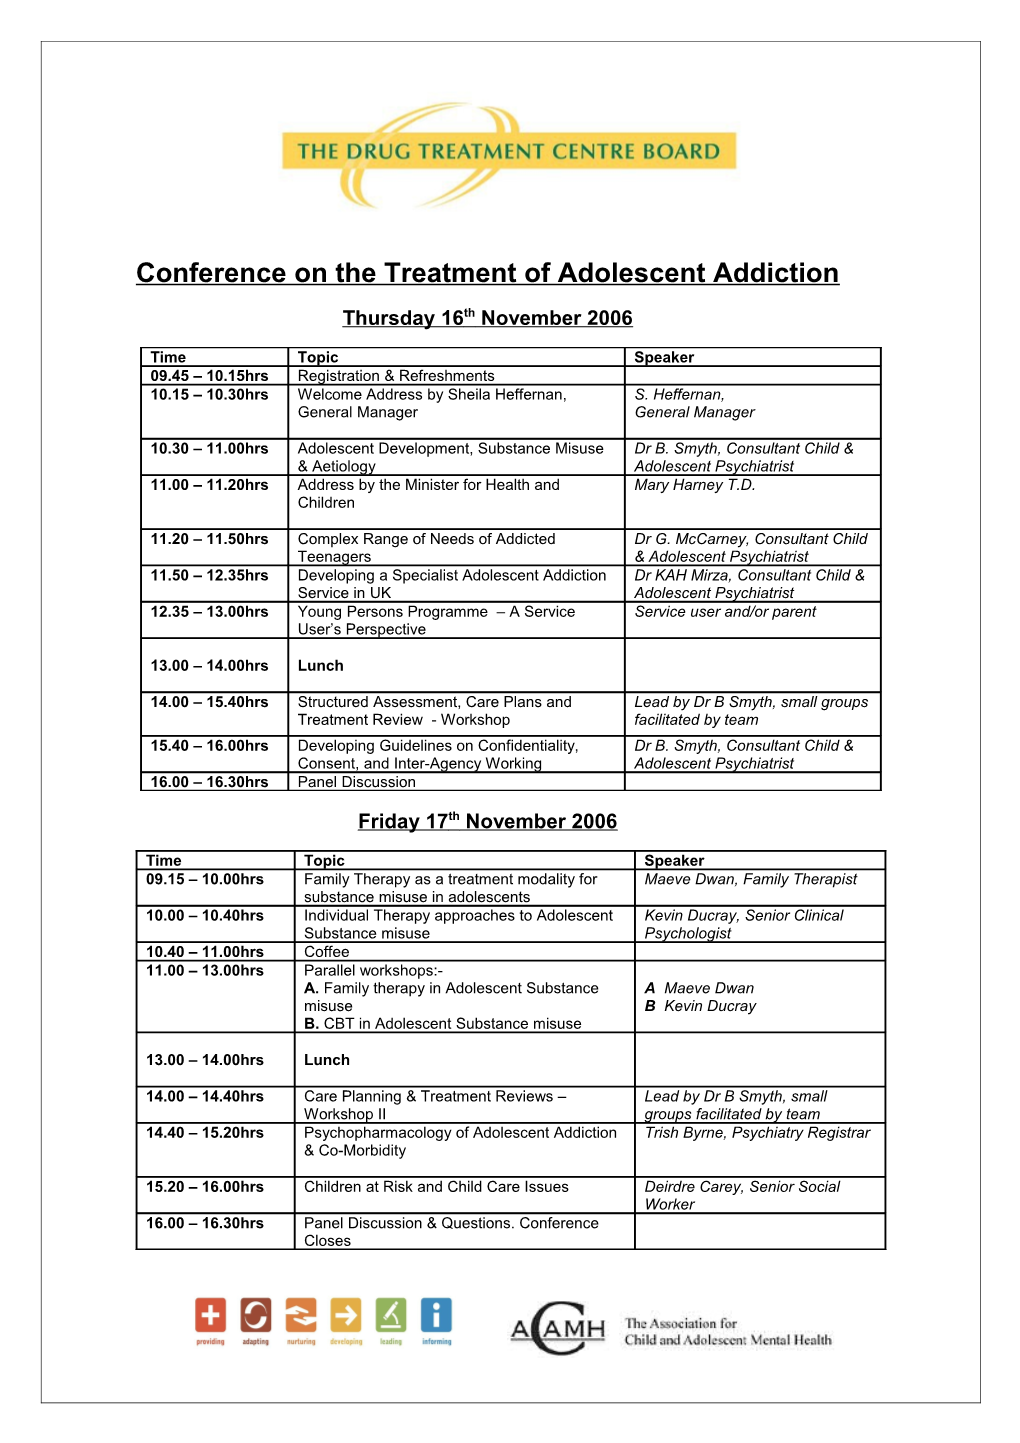 Conference on the Treatment of Adolescent Addiction